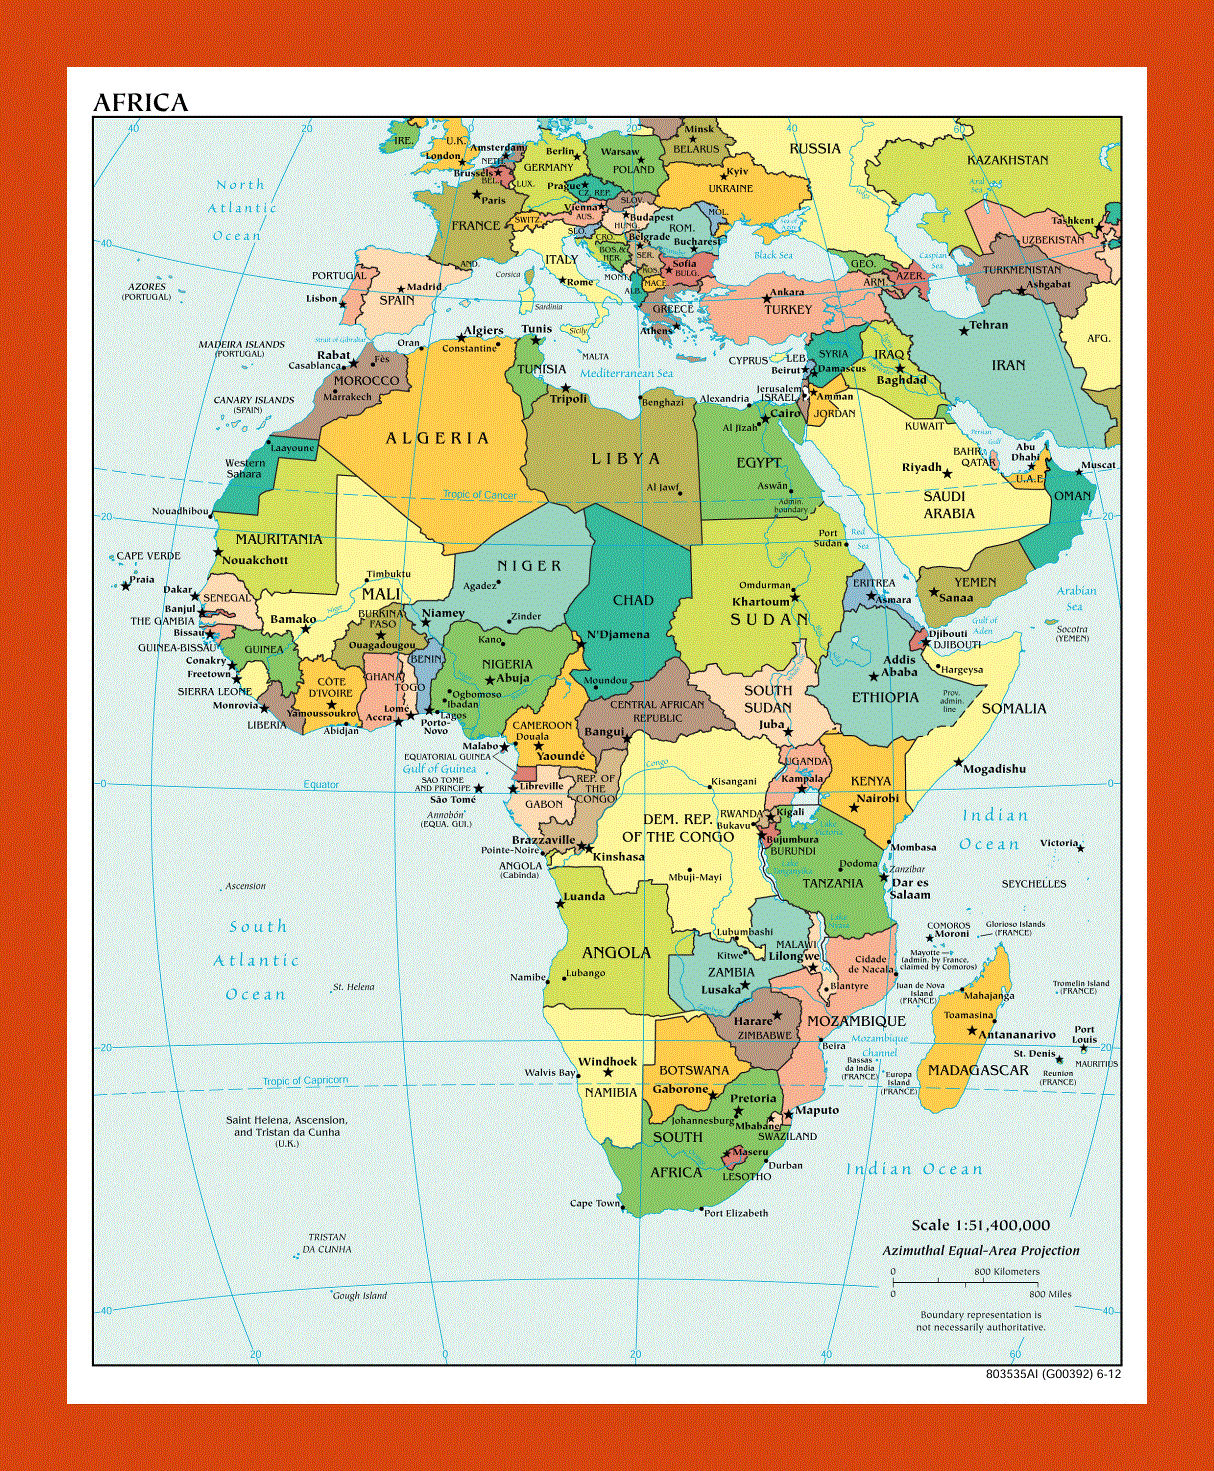 Political map of Africa - 2012